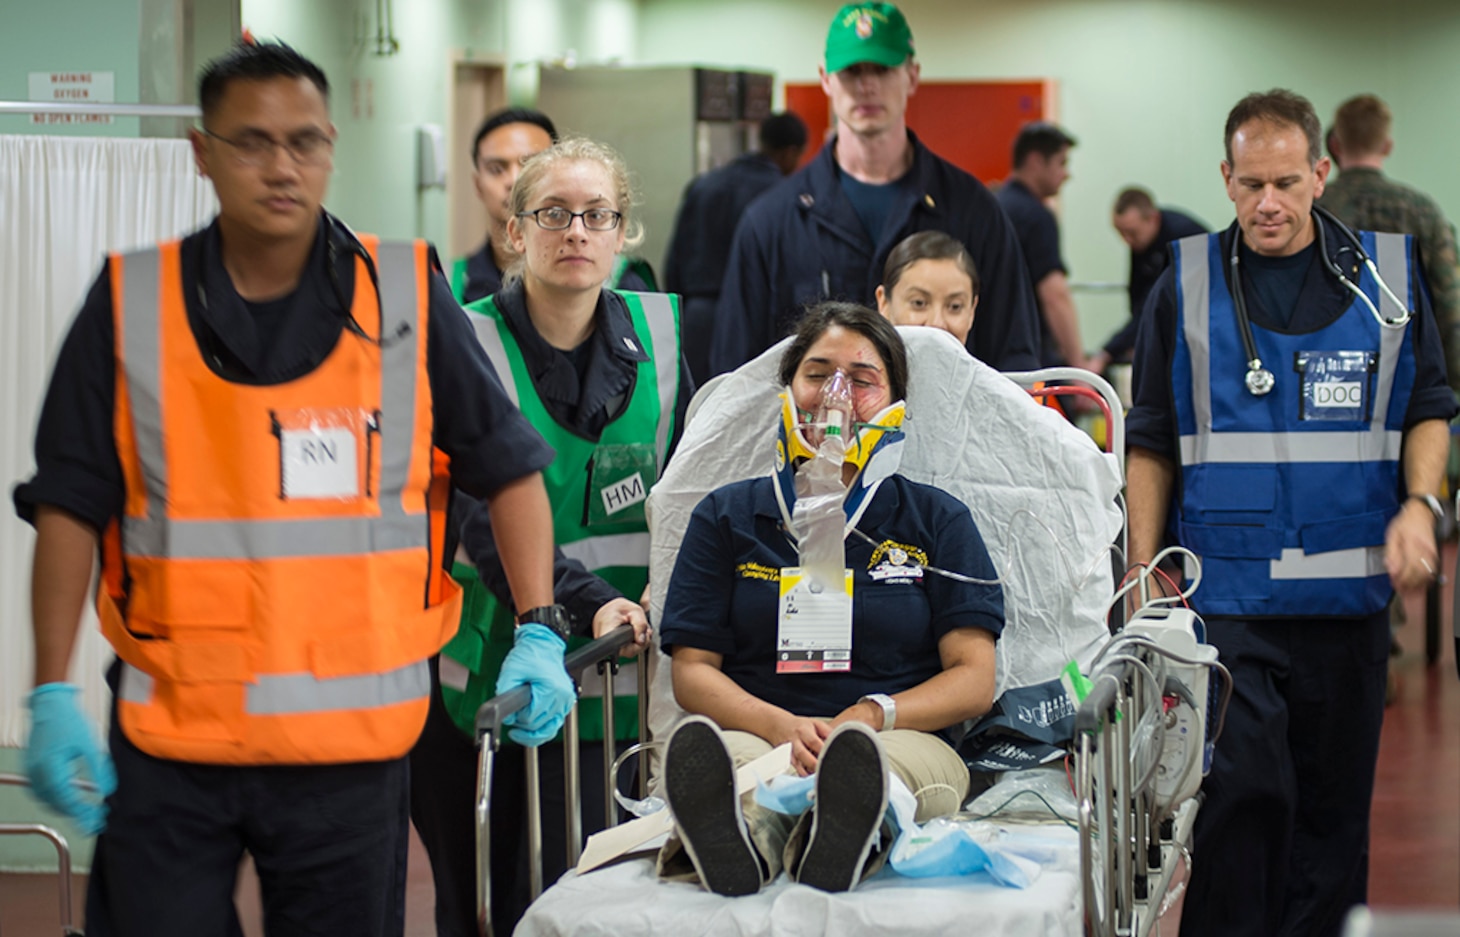 PHILIPPINES SEA (June 24, 2016) Personnel transport a patient with simulated injuries during a mass casualty drill aboard hospital ship USNS Mercy (T-AH 19). Deployed in support of Pacific Partnership 2016, medical, engineering and various other personnel embarked aboard Mercy are working side-by-side with partner nation counterparts, exchanging ideas, building best practices and relationships to ensure preparedness should disaster strike.